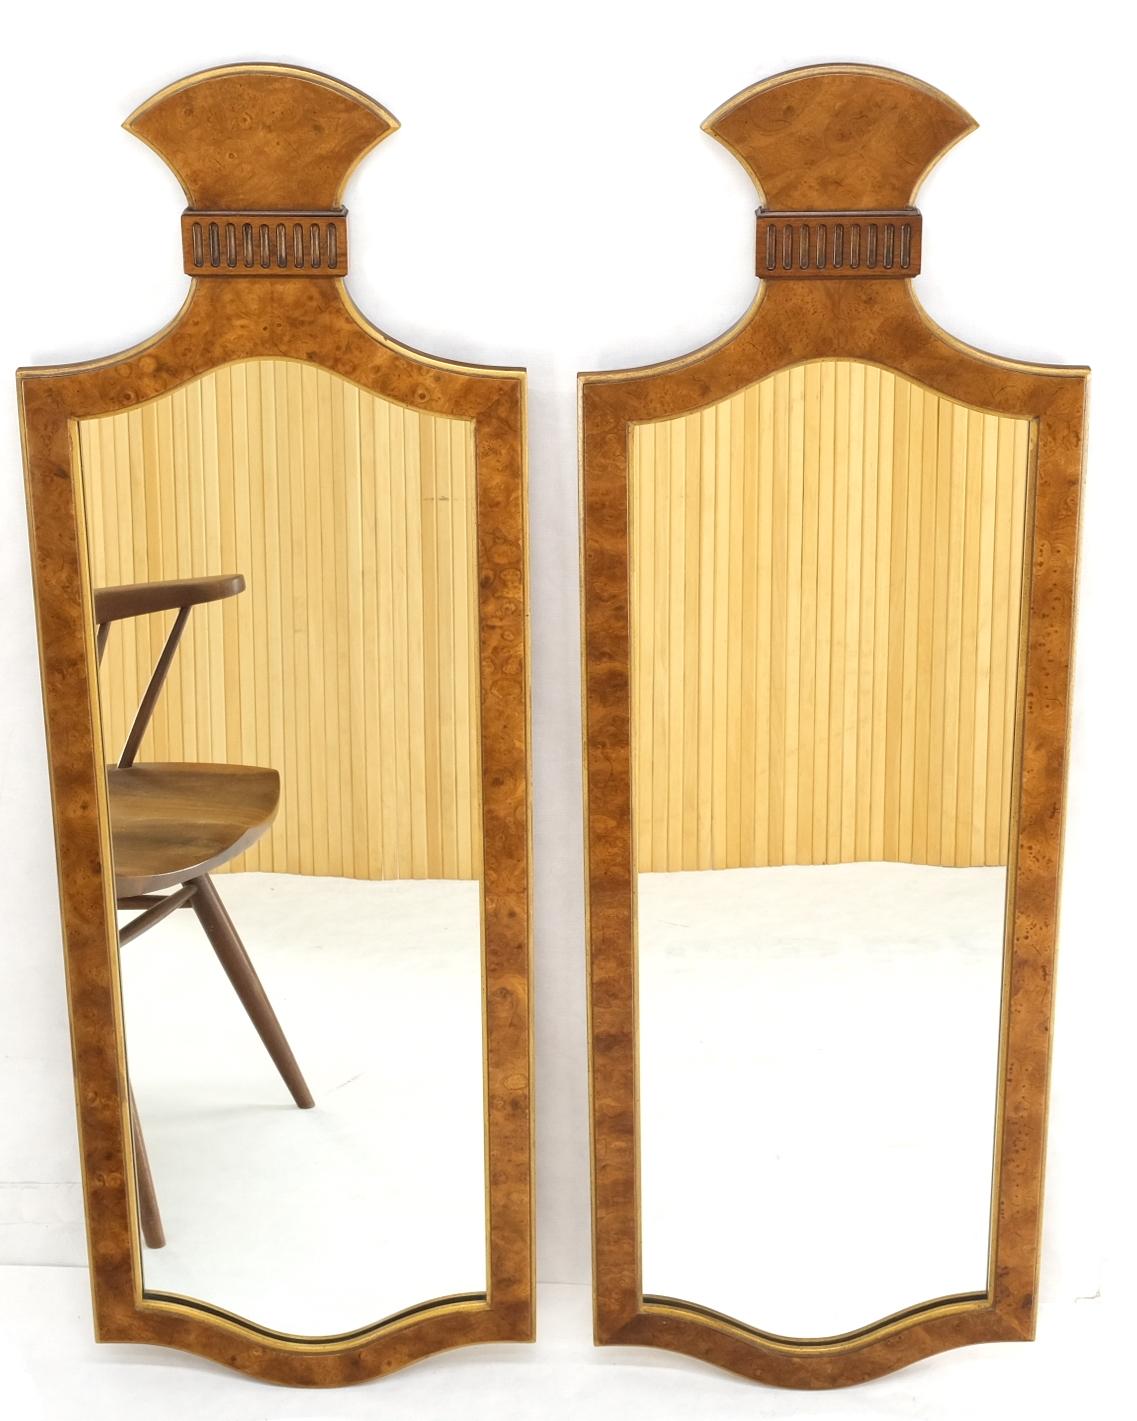 Pair of Decorative Figural Shape Burl Wall Mirrors Mid Century Modern Mint For Sale 2